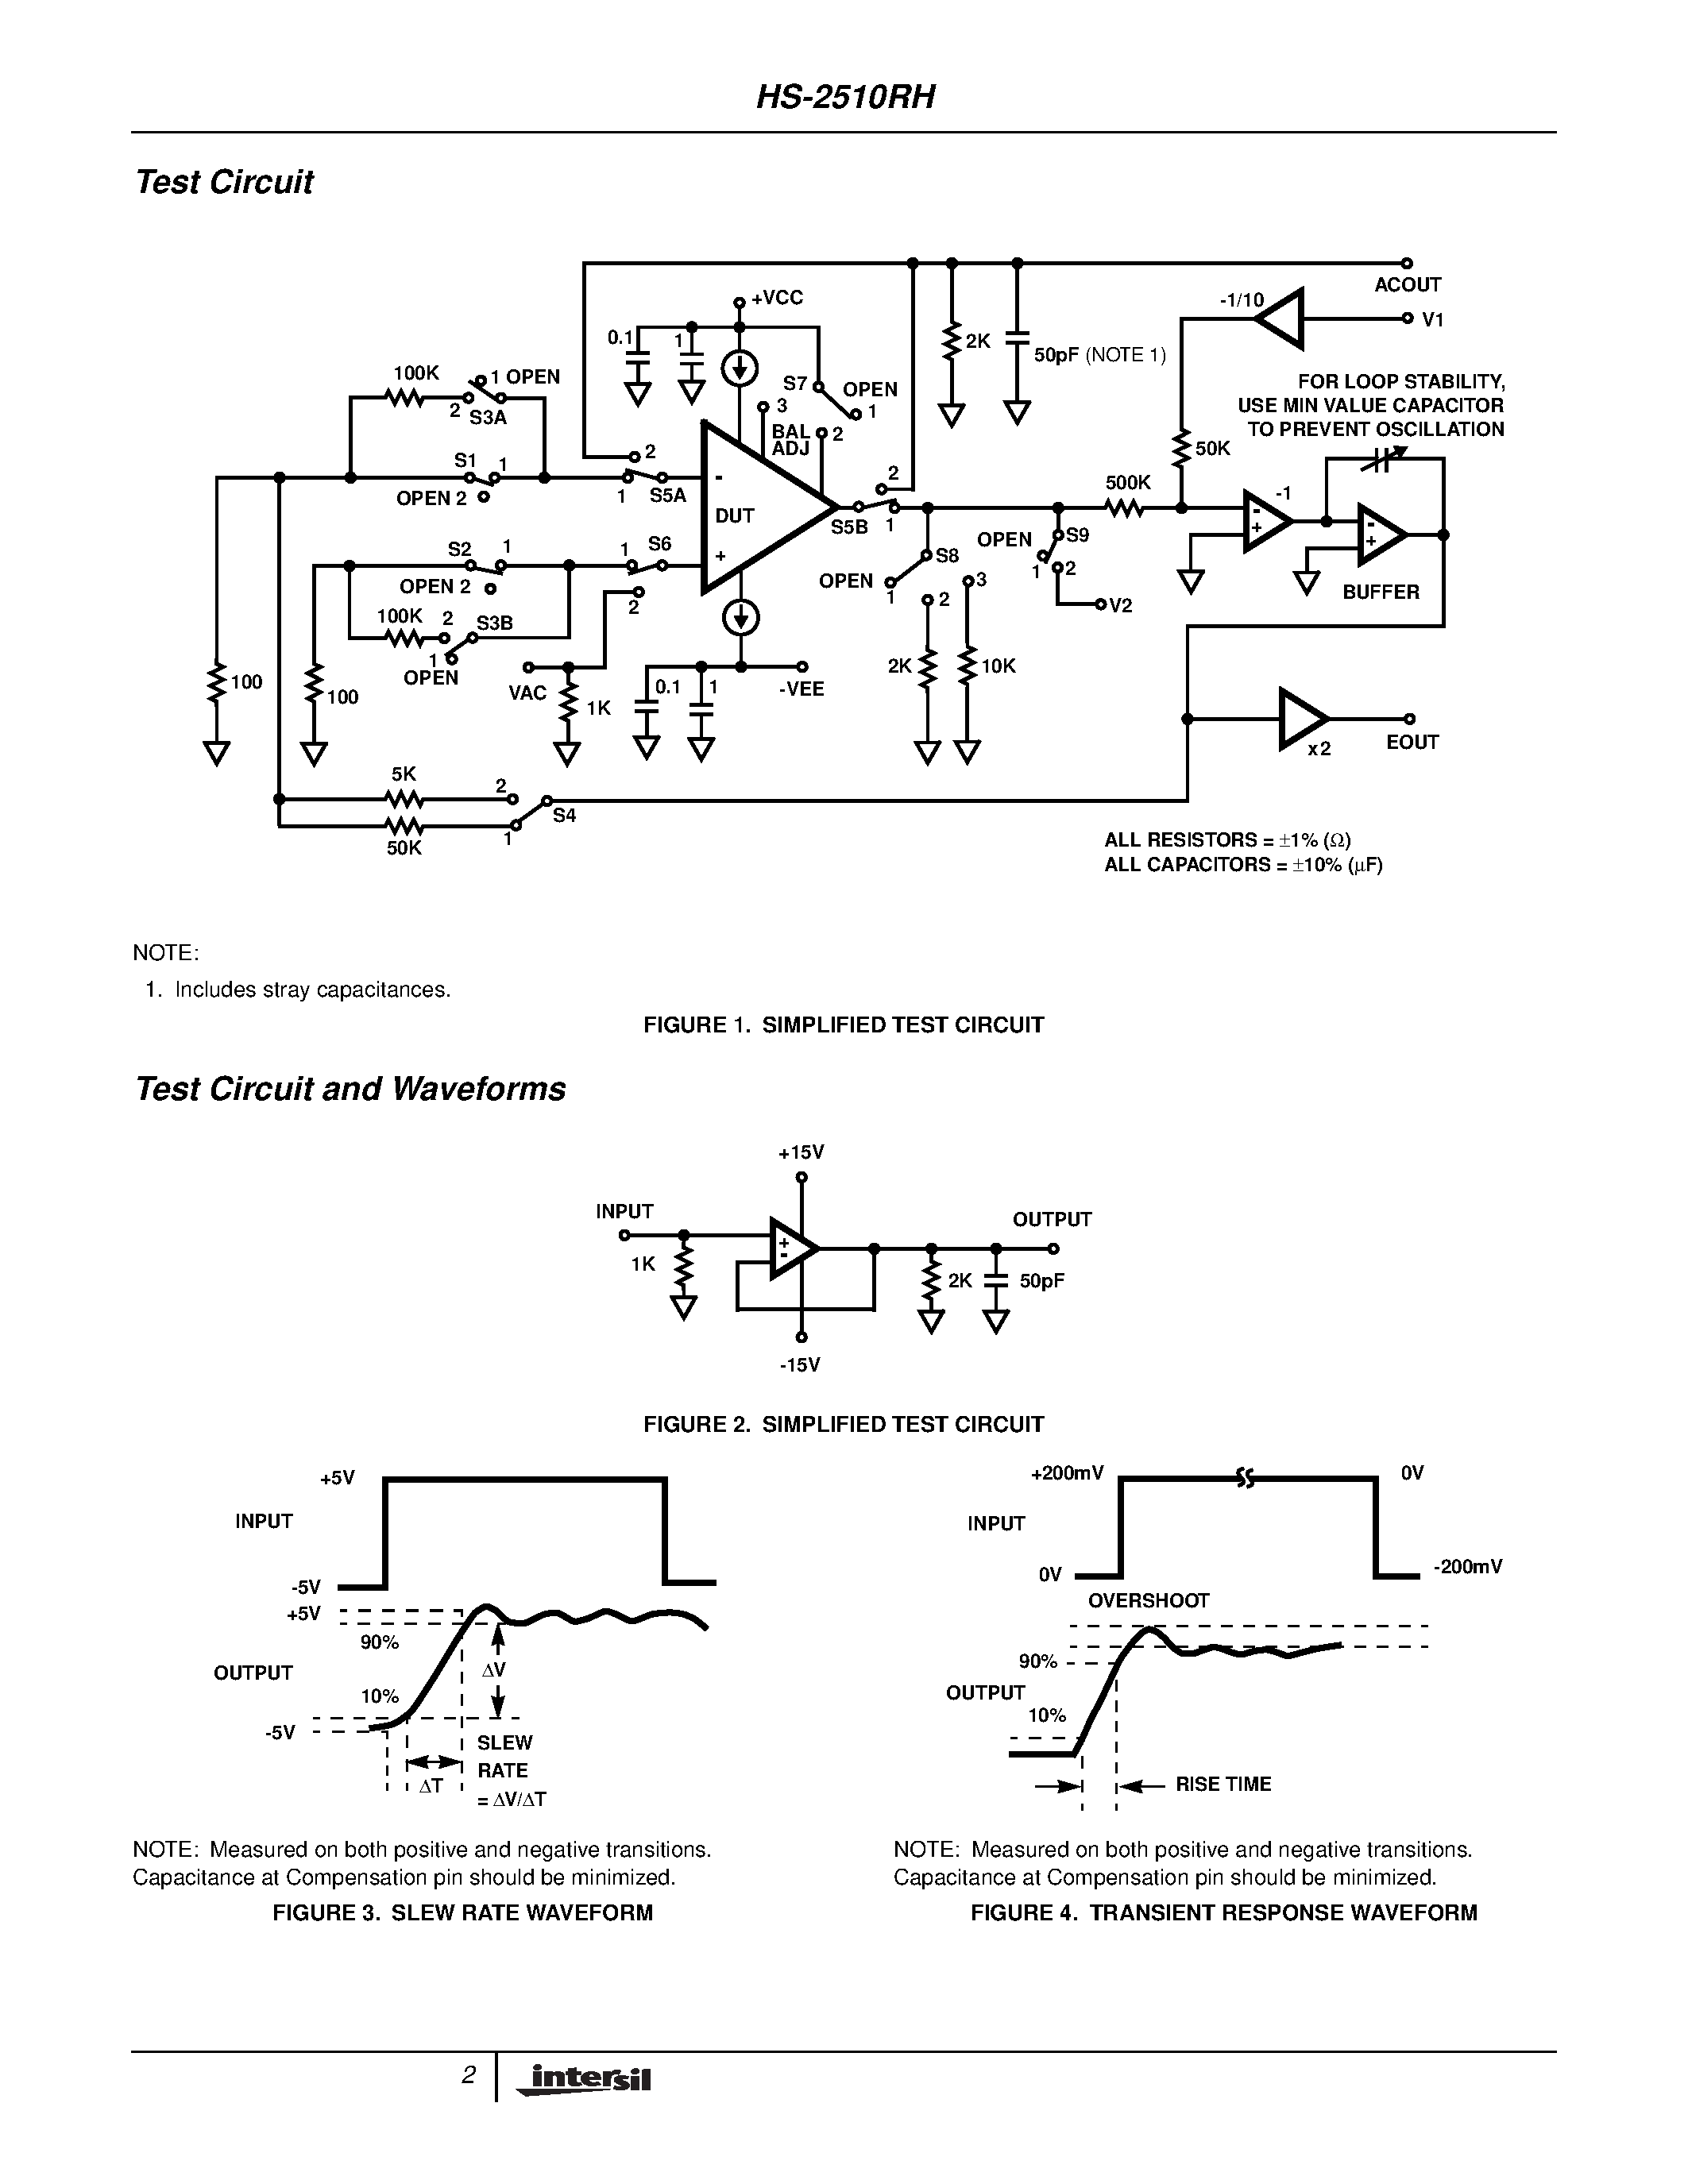 Datasheet HS7B-2510RH-Q - Radiation Hardened High Slew Rate Operational Amplifier page 2